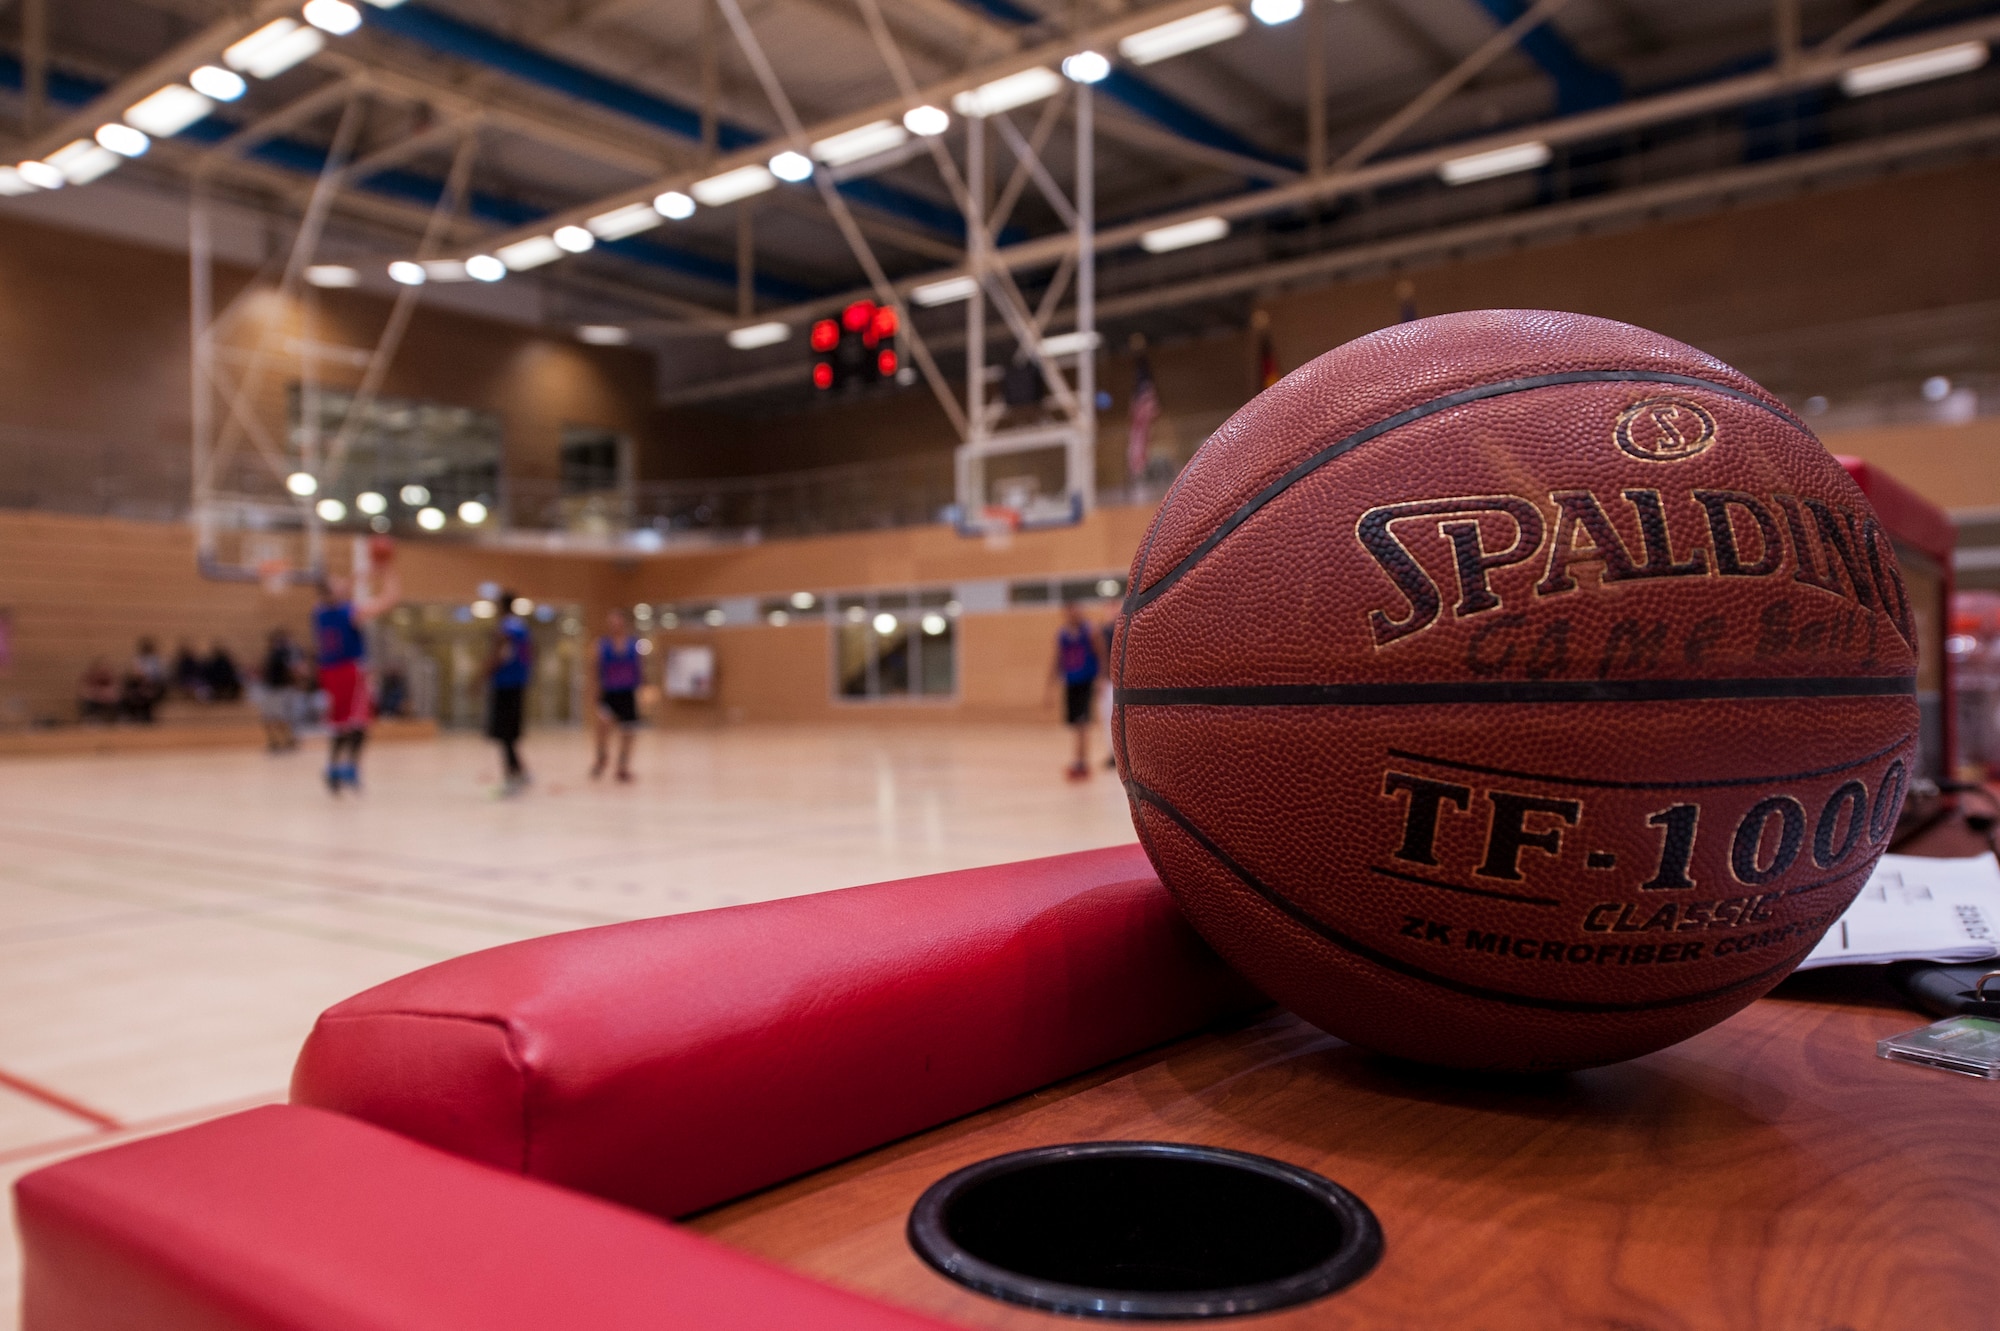 A basketball rests on a table during half time of the Intramural Basketball Championship game inside the George Price Gymnasium Jan. 28, 2016 at Spangdahlem Air Base, Germany. After the game ended, the 52nd Logistics Readiness Squadron finished undefeated this season. (U.S. Air Force photo by Senior Airman Rusty Frank/Released)